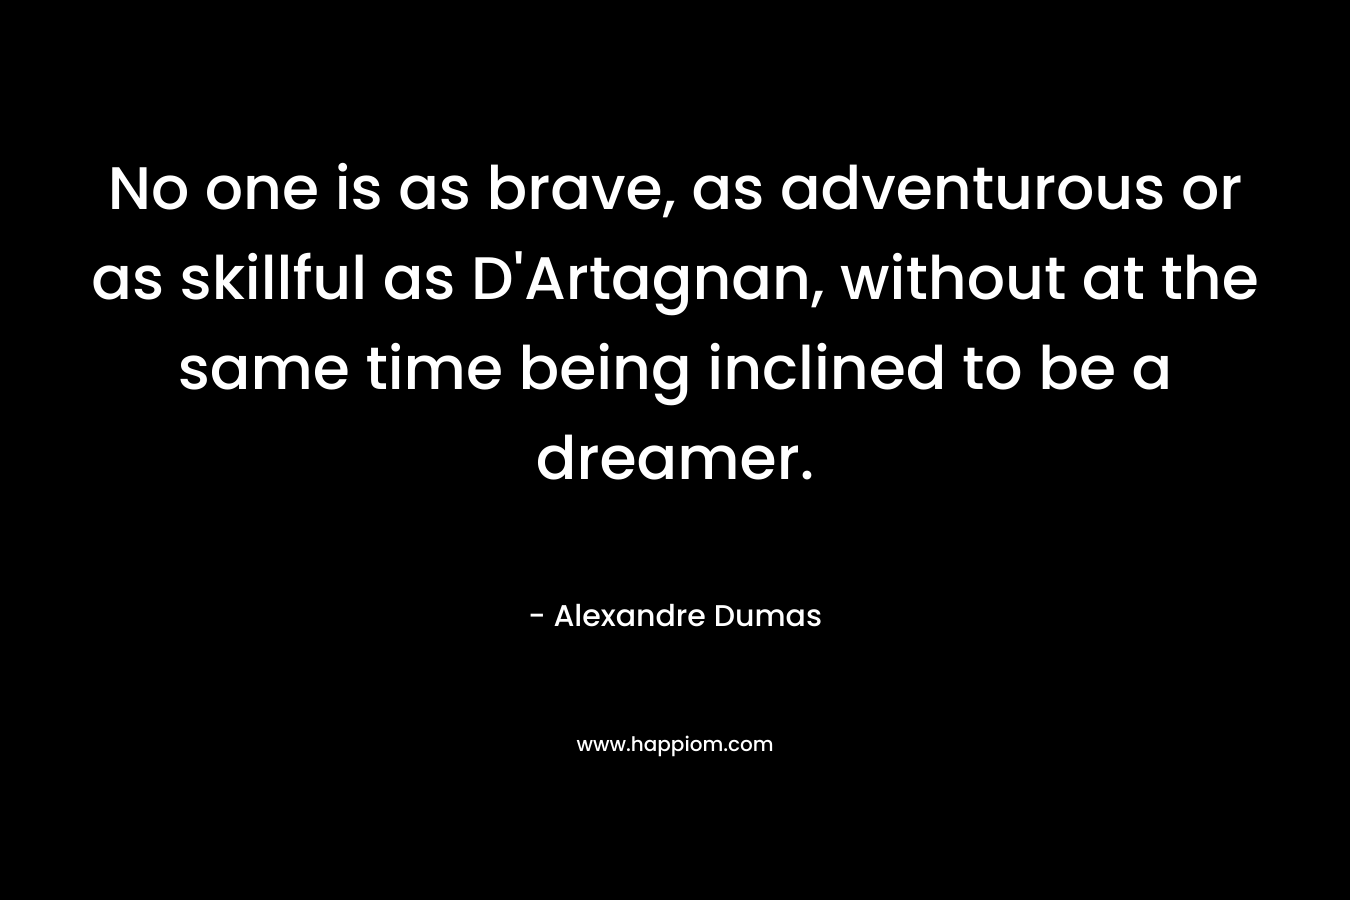 No one is as brave, as adventurous or as skillful as D'Artagnan, without at the same time being inclined to be a dreamer.